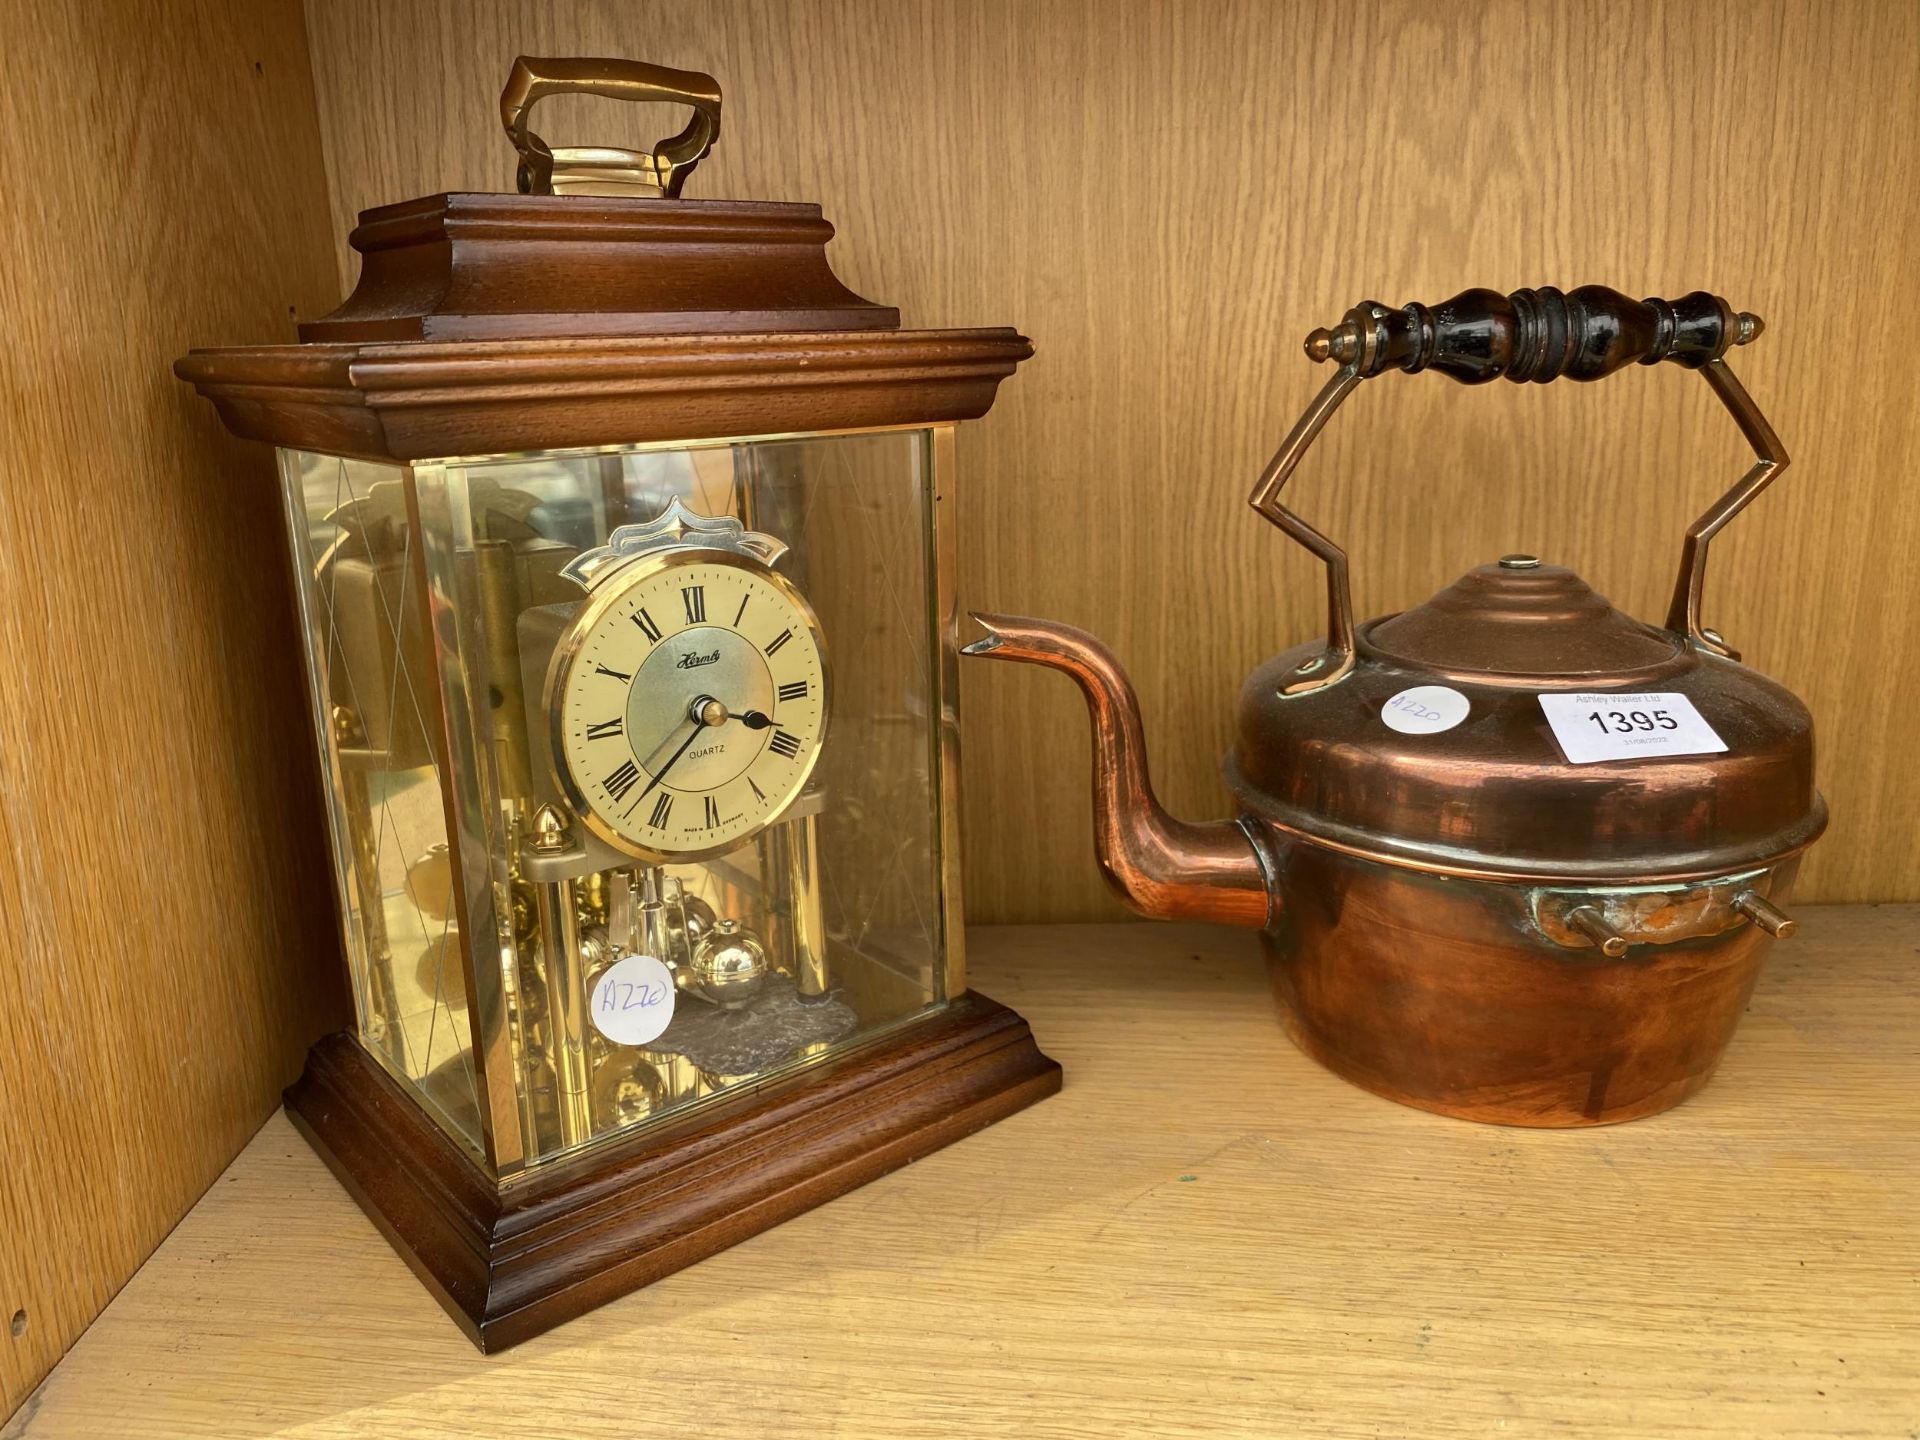 A COPPER KETTLE AND A MANTLE CLOCK